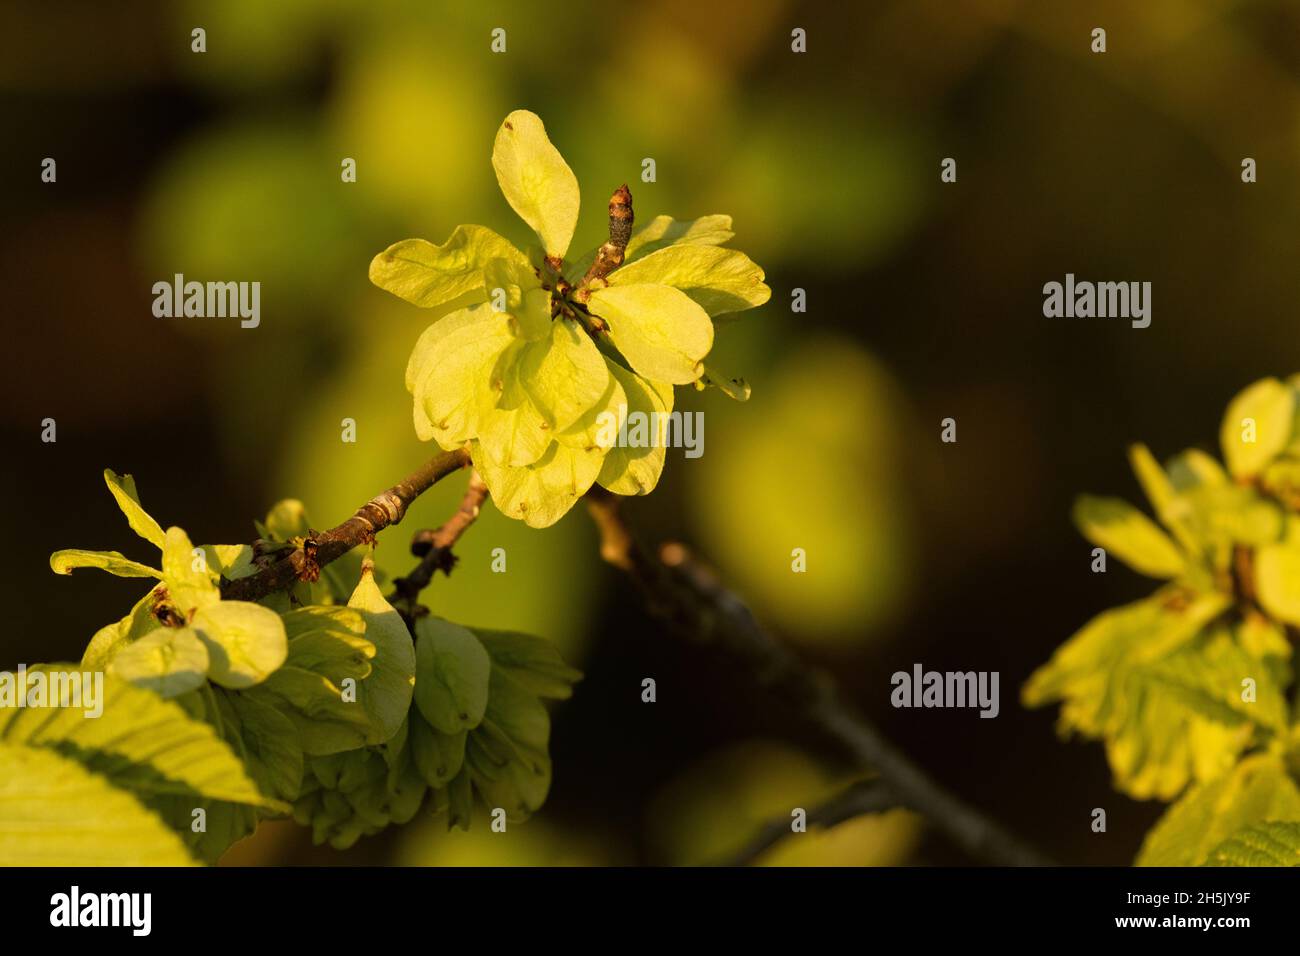 Seeds of a Wych elm, Ulmus glabra during a sunset in Estonian boreal forest. Stock Photo